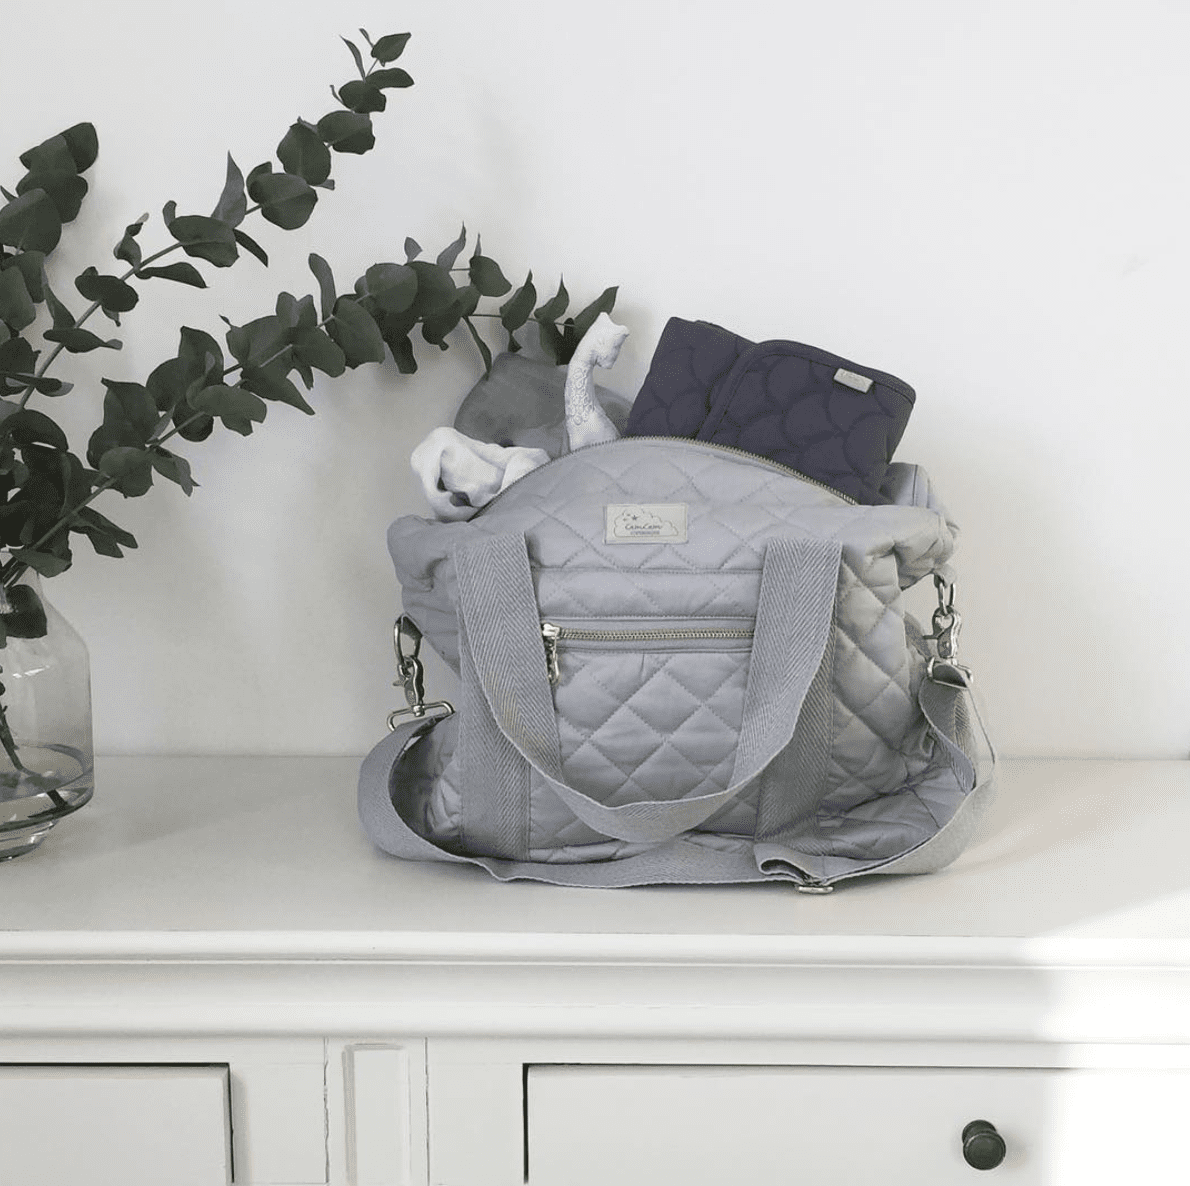 Mums nappy bag with portable changing mat